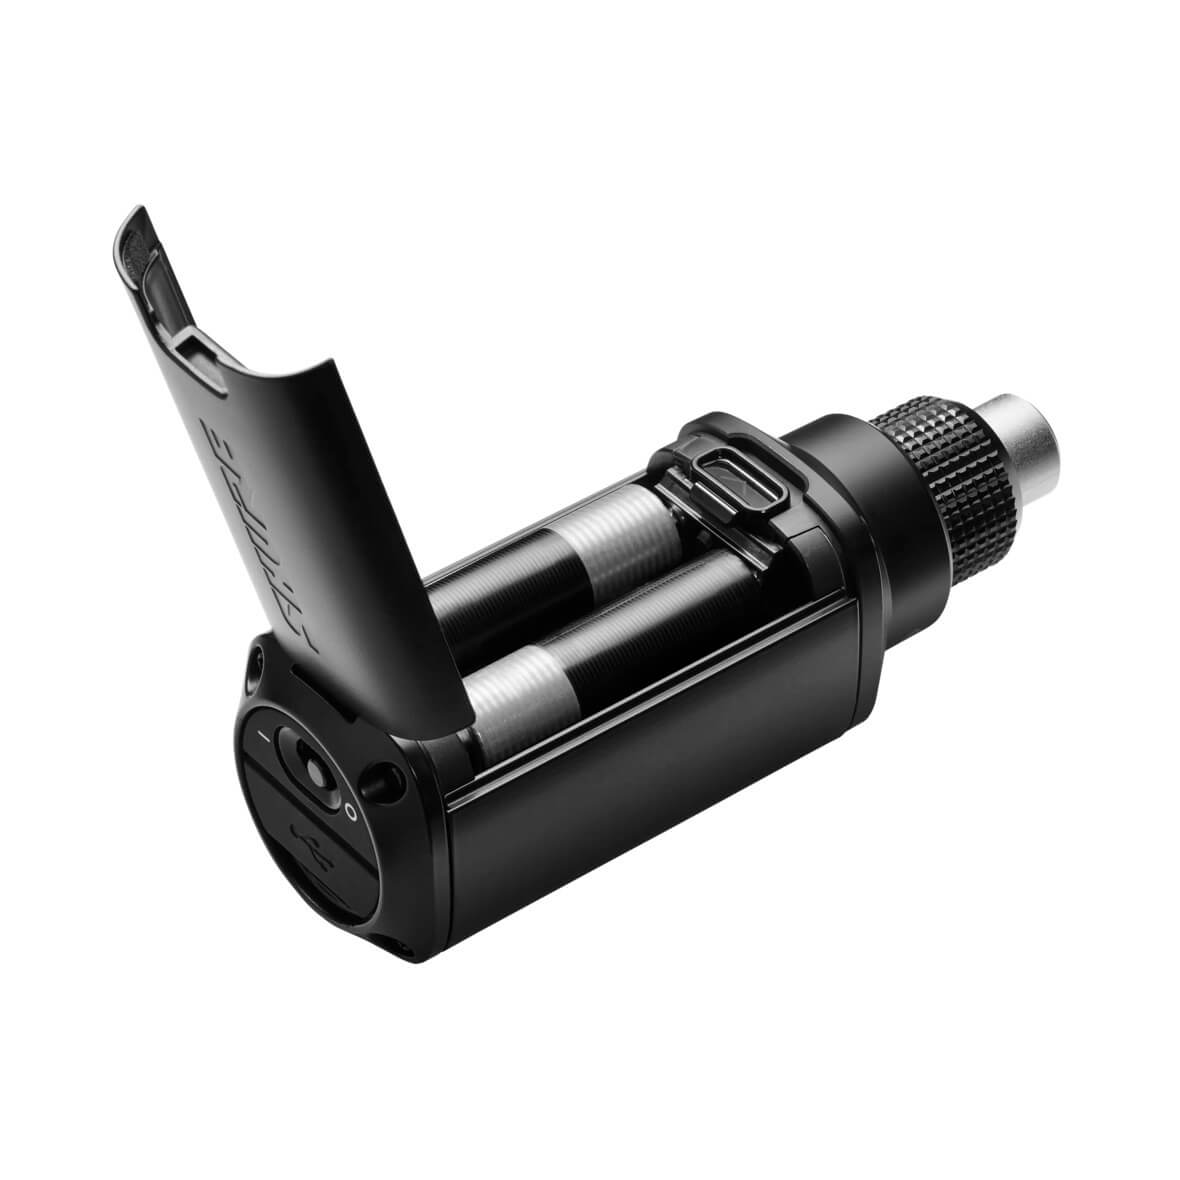 Shure SLXD3 - Plug-on Digital Wireless Transmitter with XLR Connector, shown with AA batteries